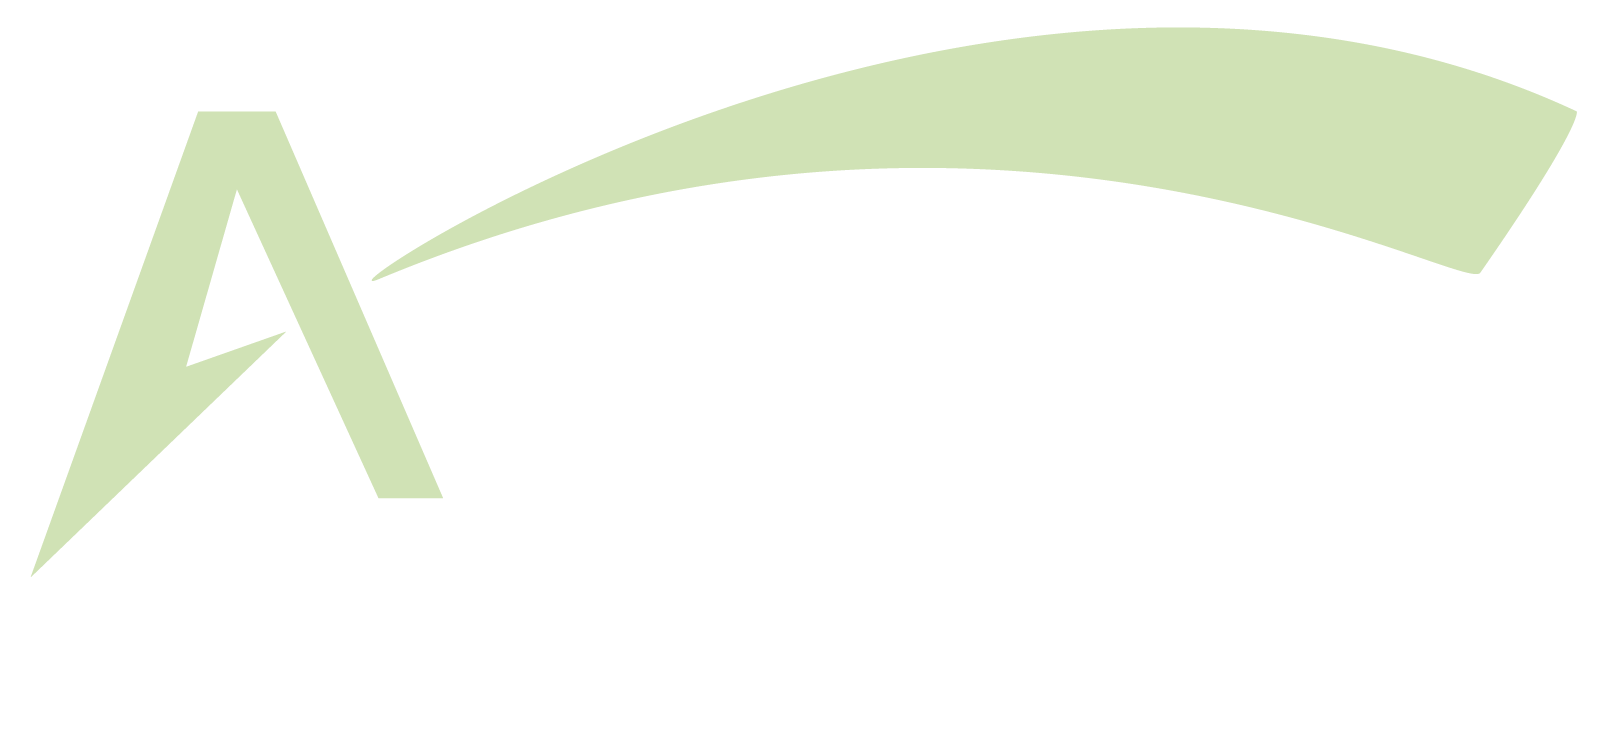 Accelerate Consulting Group